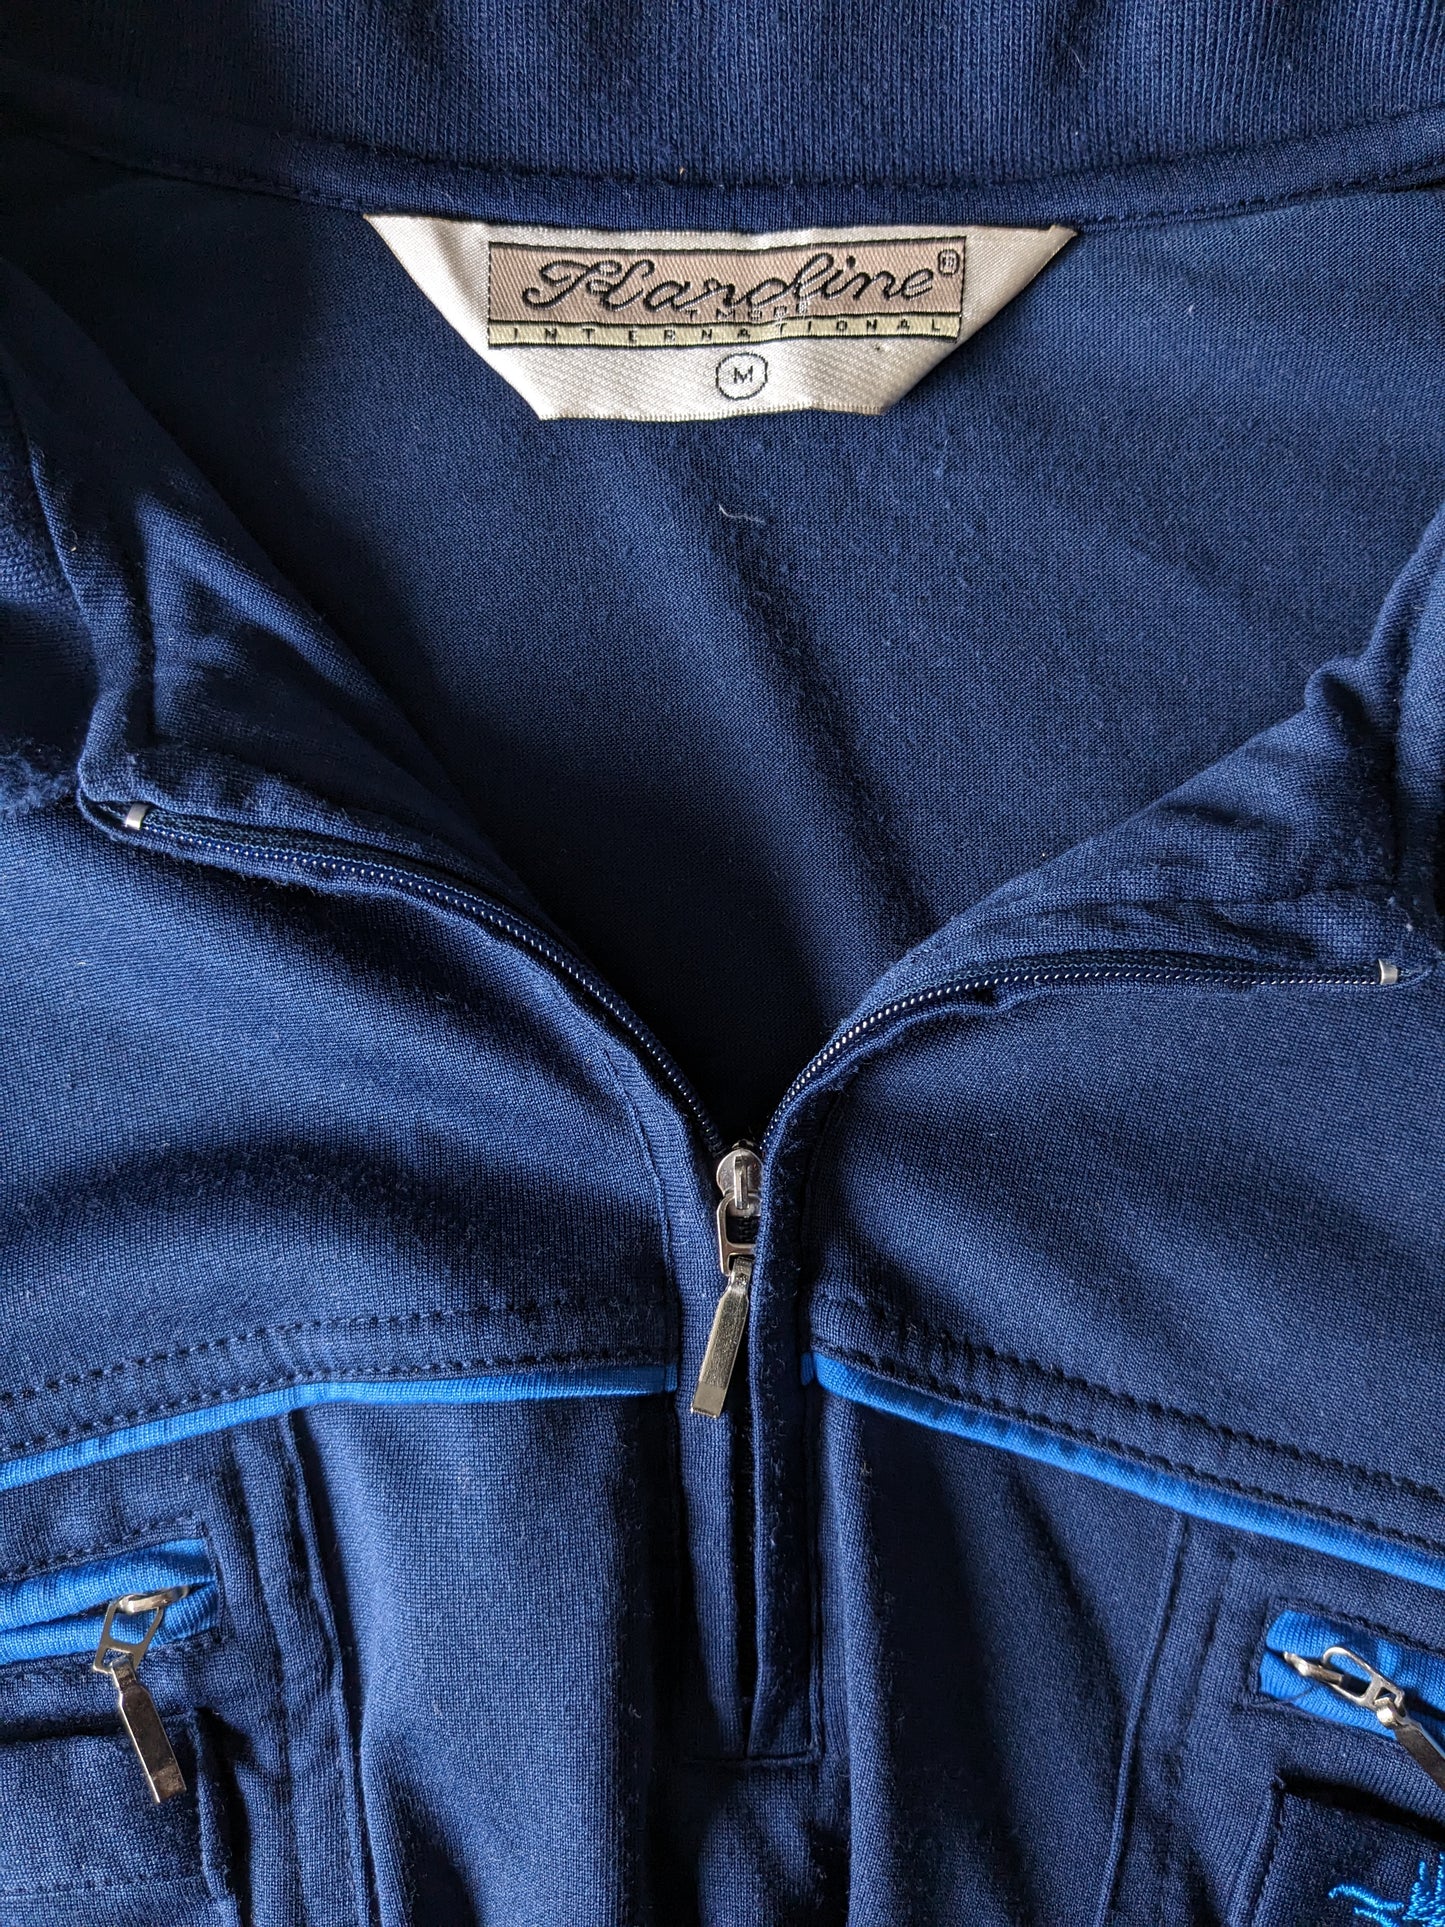 Vintage hardline polo with elastic band and zipper. Dark blue. Size M / L.